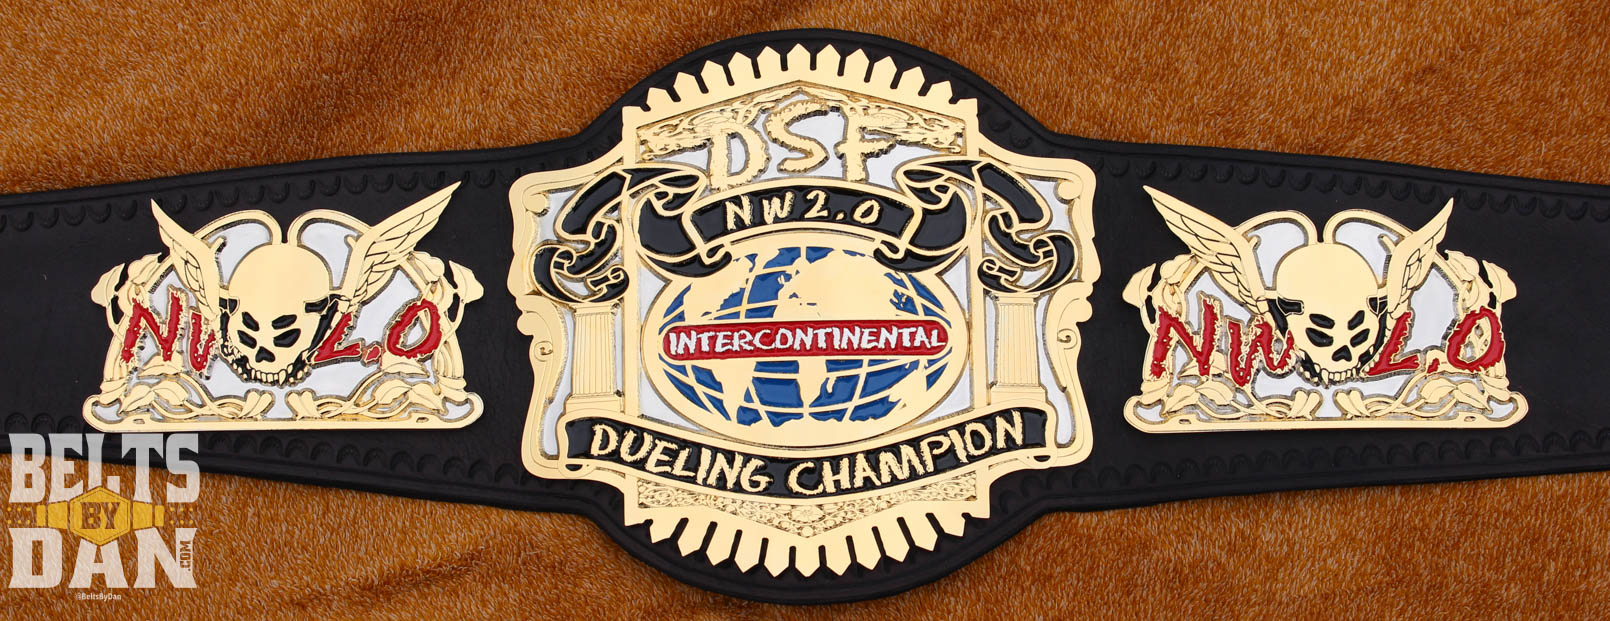 NW 2.0 Dueling Champion | Belts by Dan